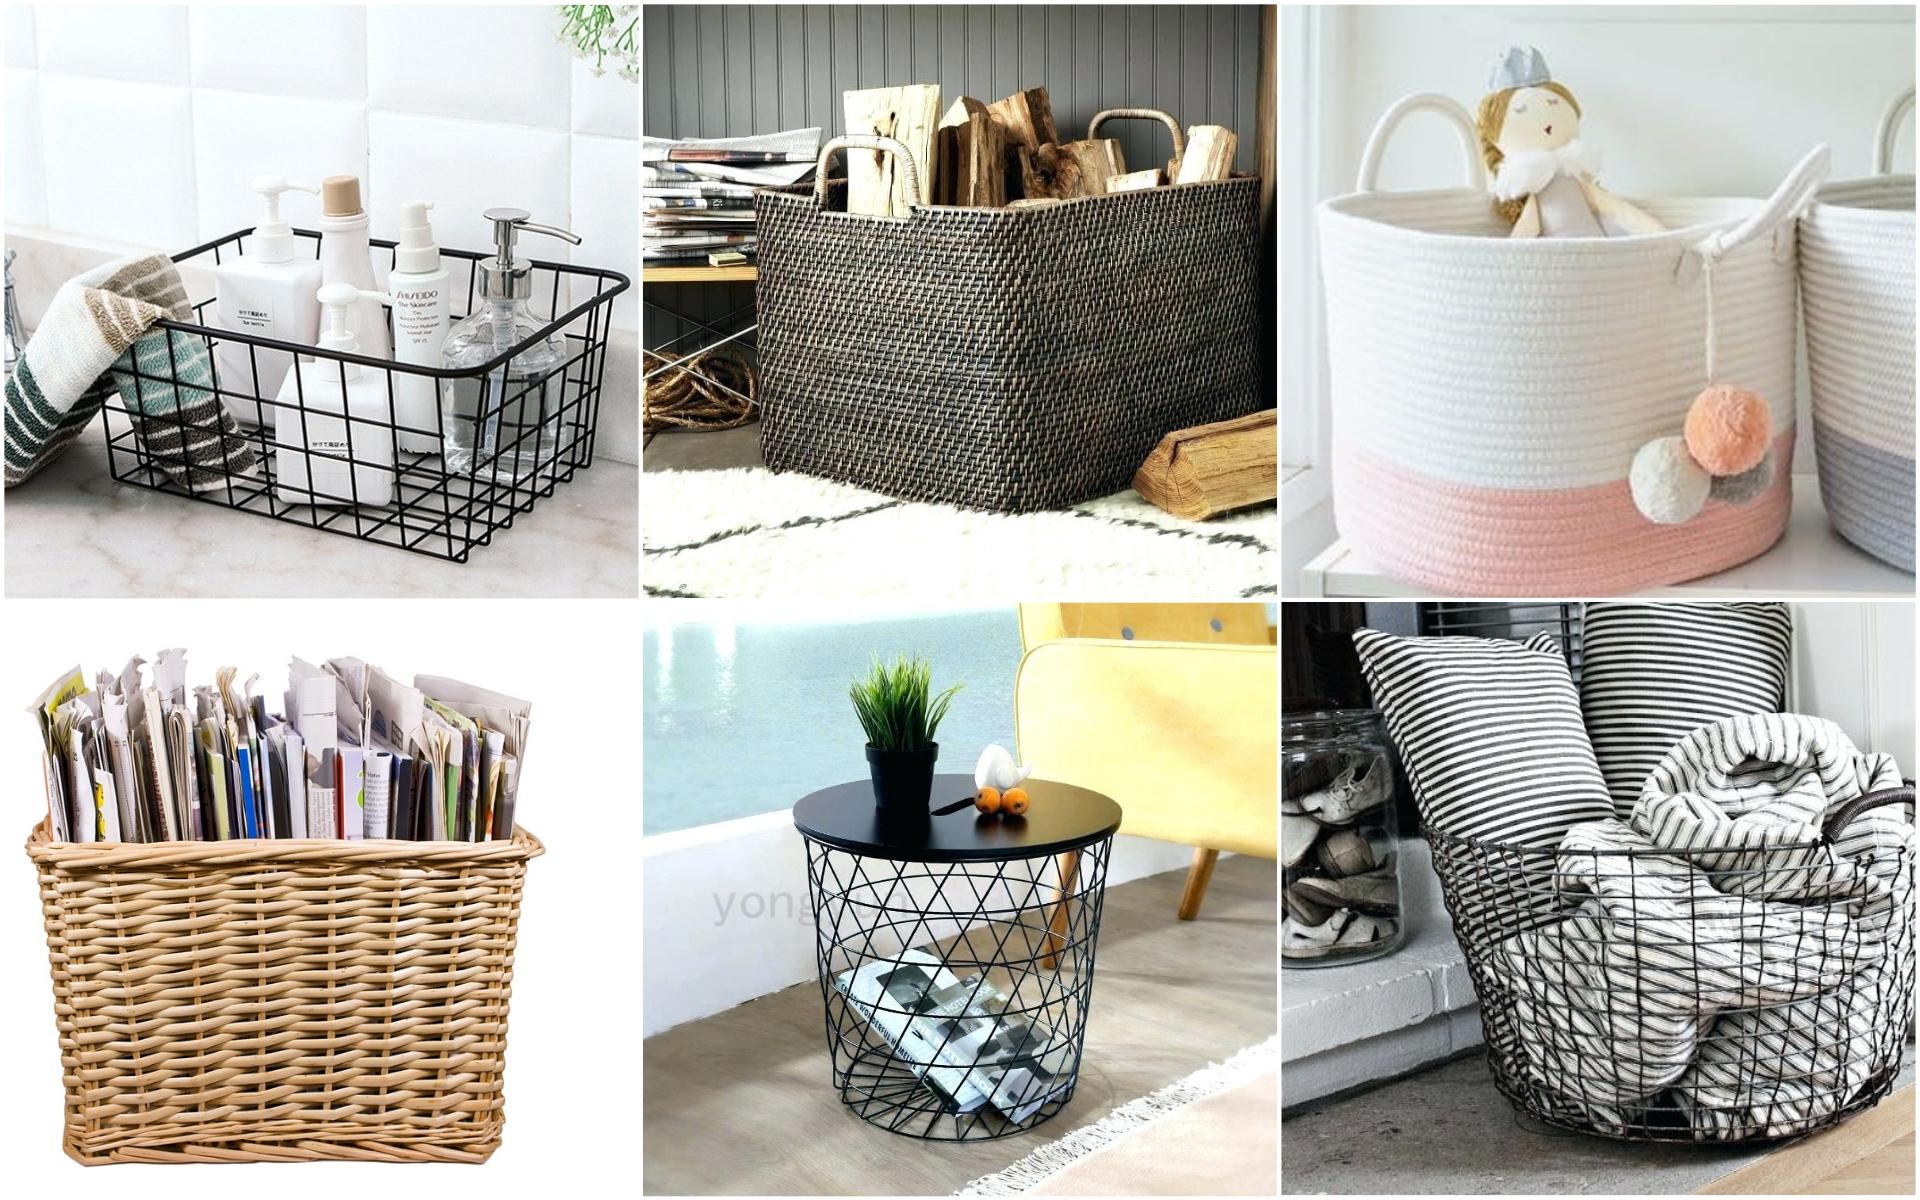 Using Baskets For Storage Living Room